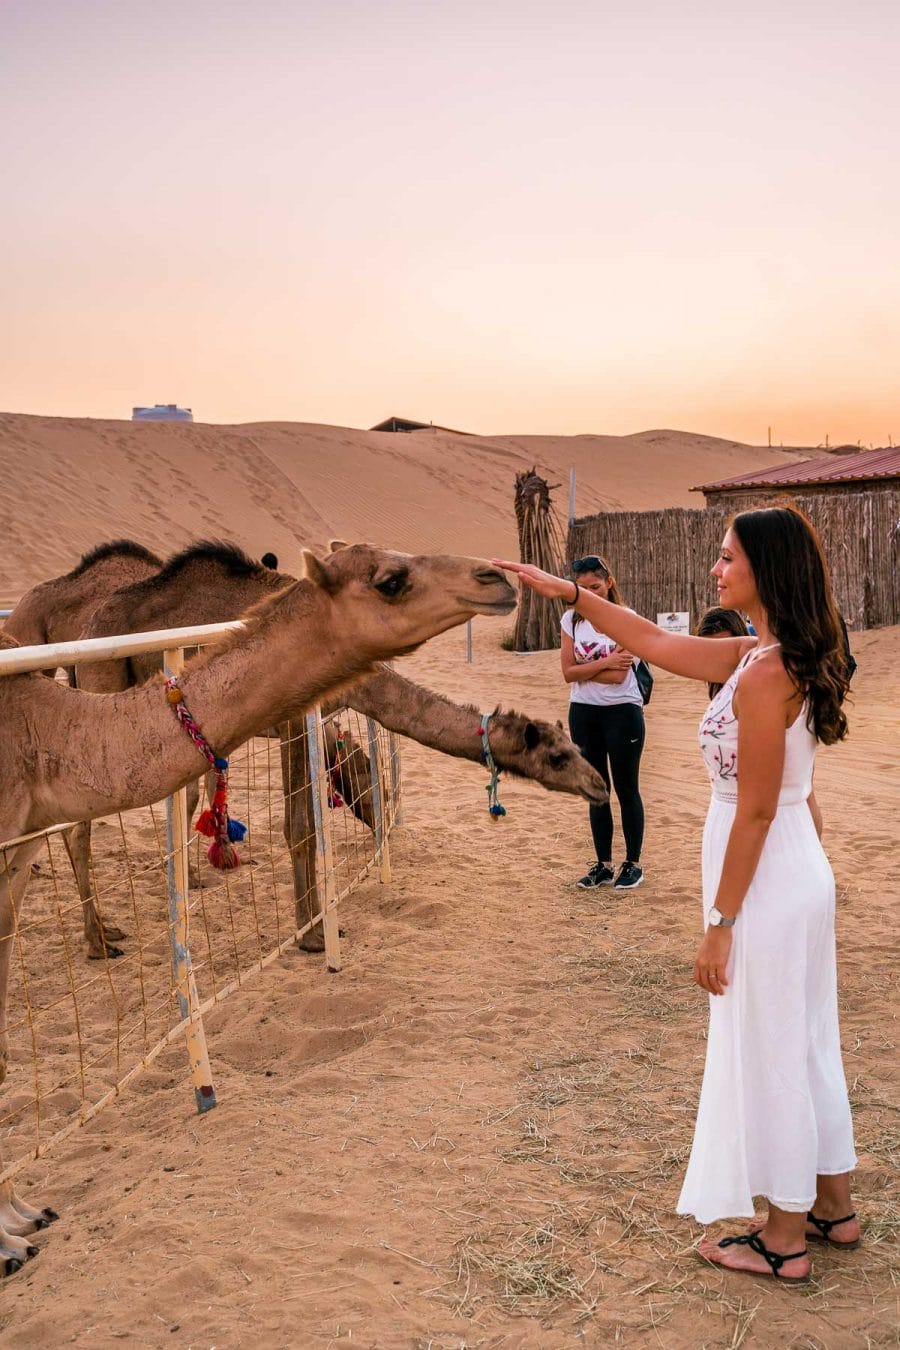 Girl in a white dress playing with camels at sunset in the Dubai desert